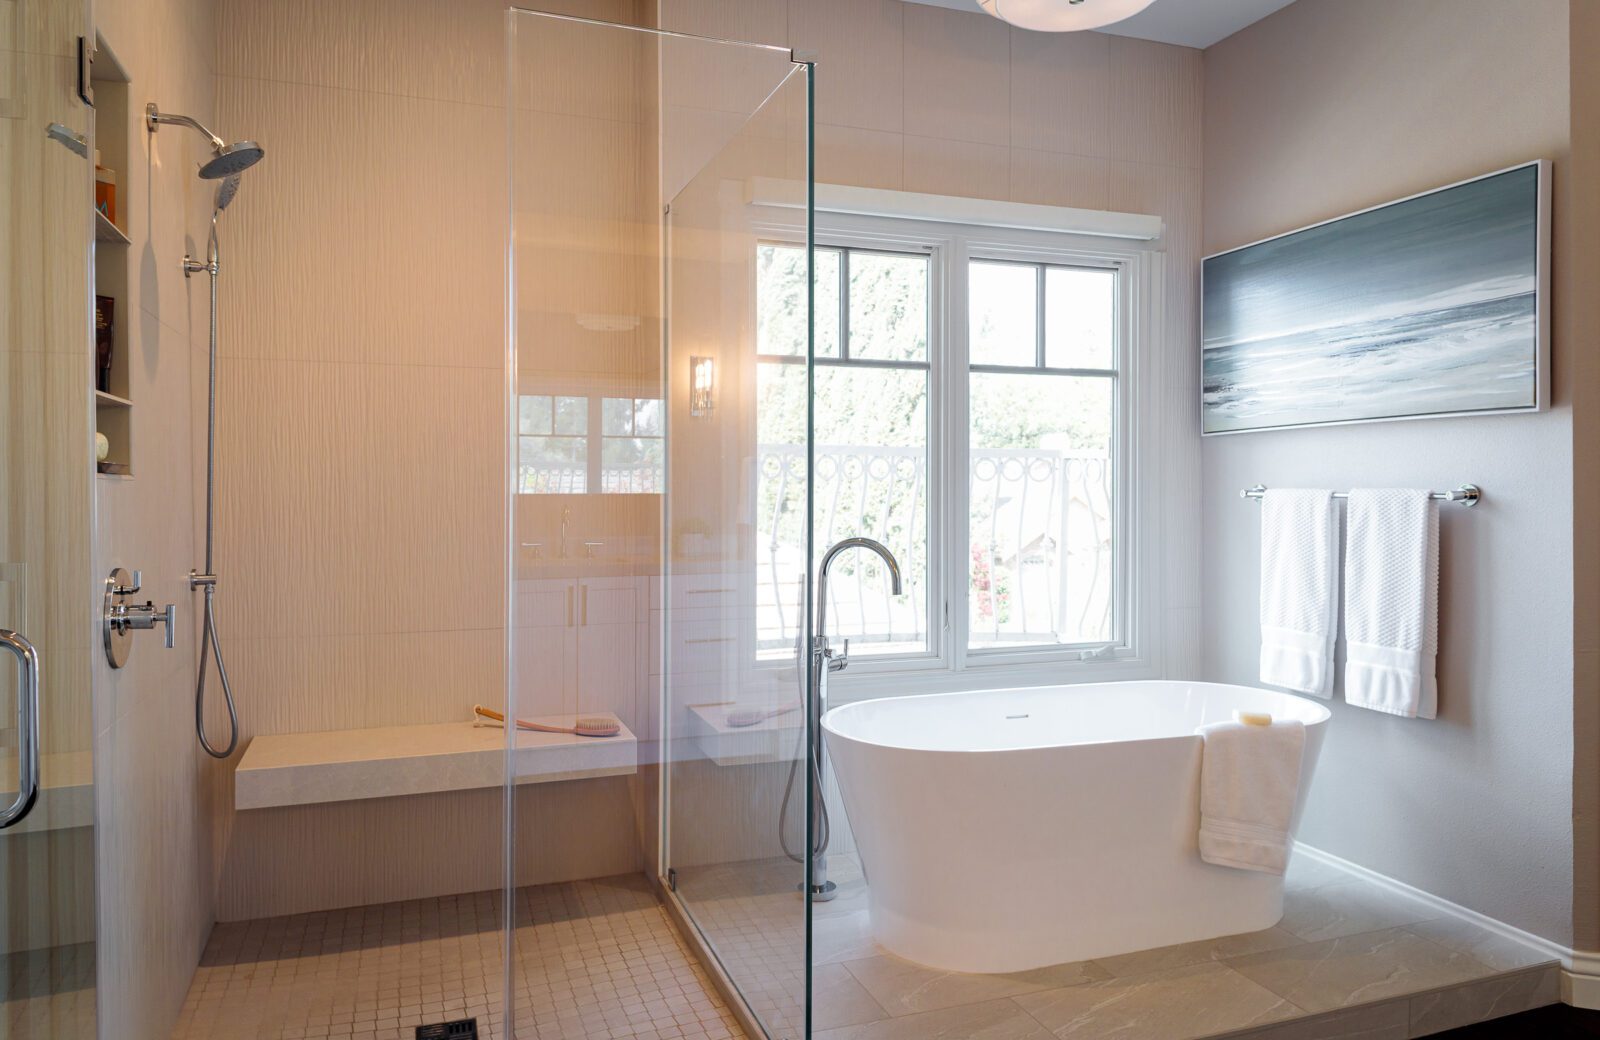 after image of bathroom remodel tub and glass-walled shower